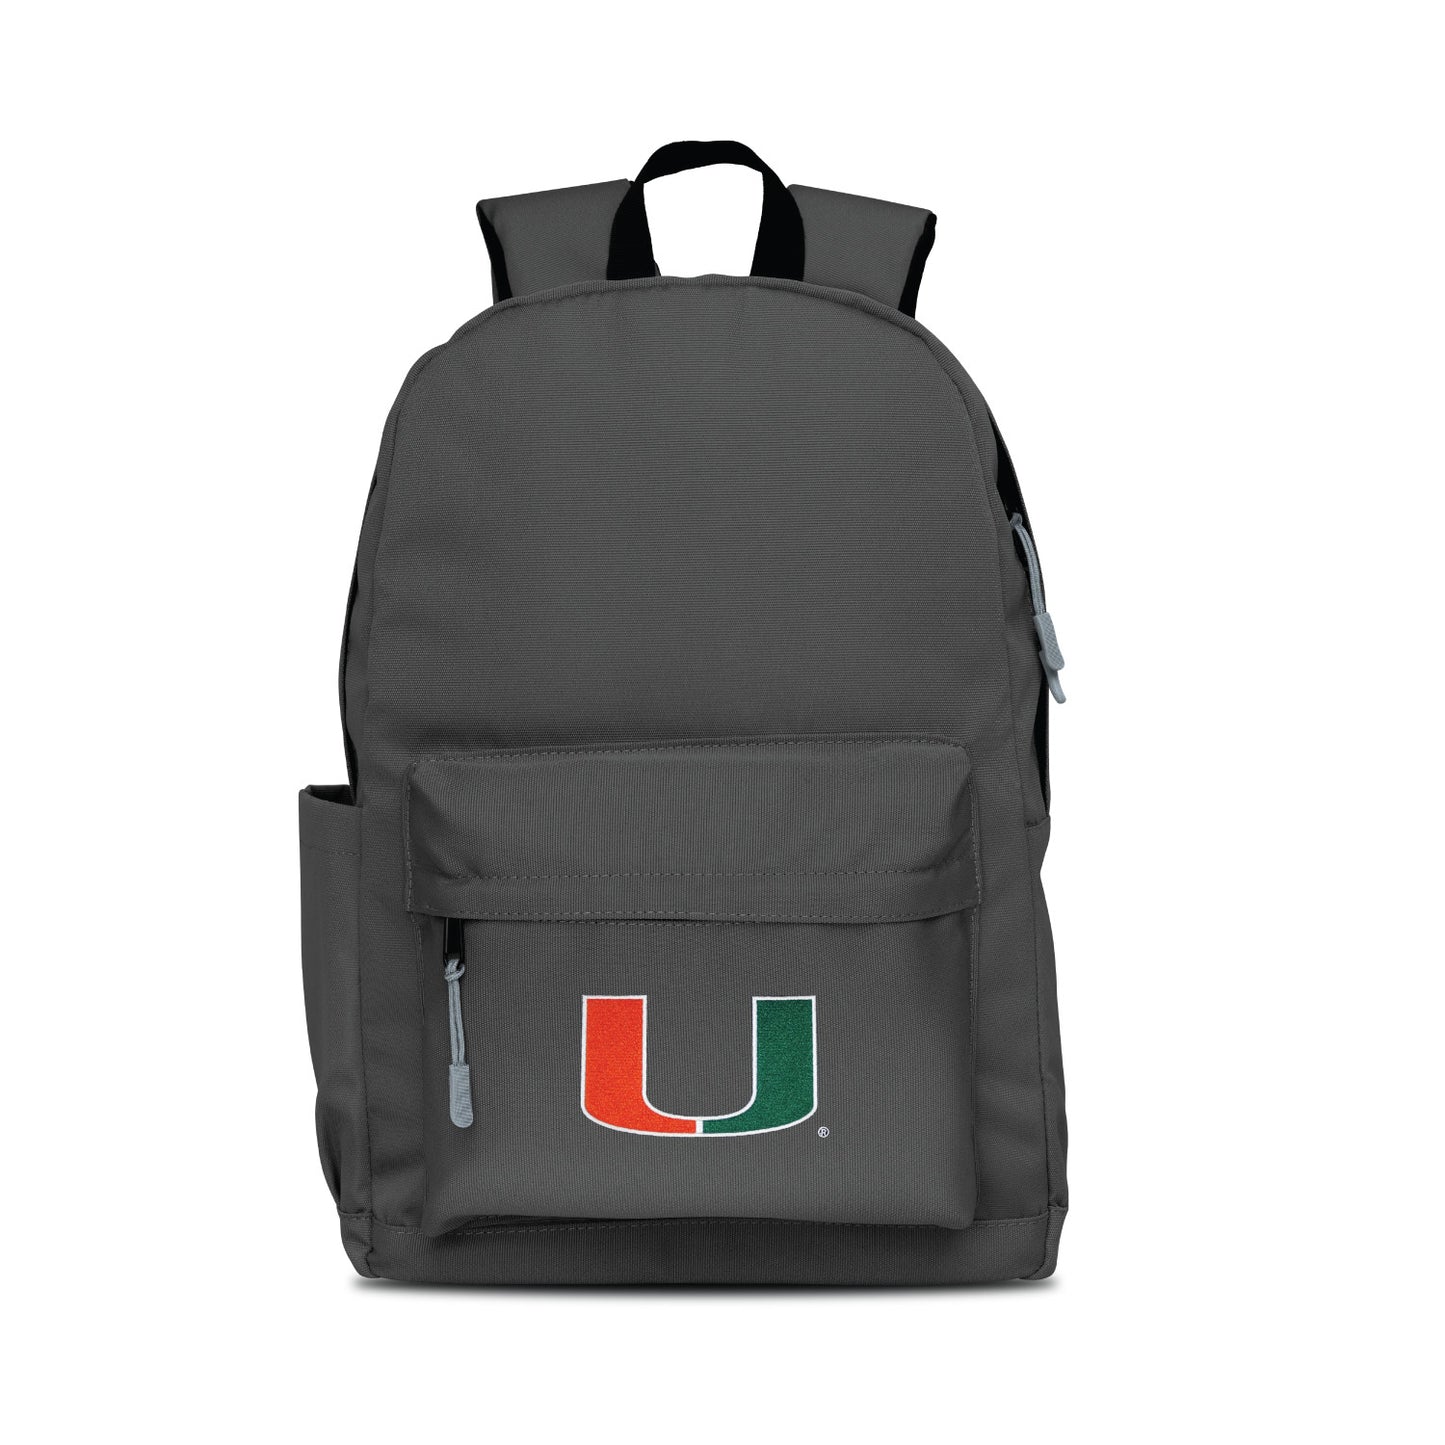 Miami Hurricanes Campus Laptop Backpack- Gray